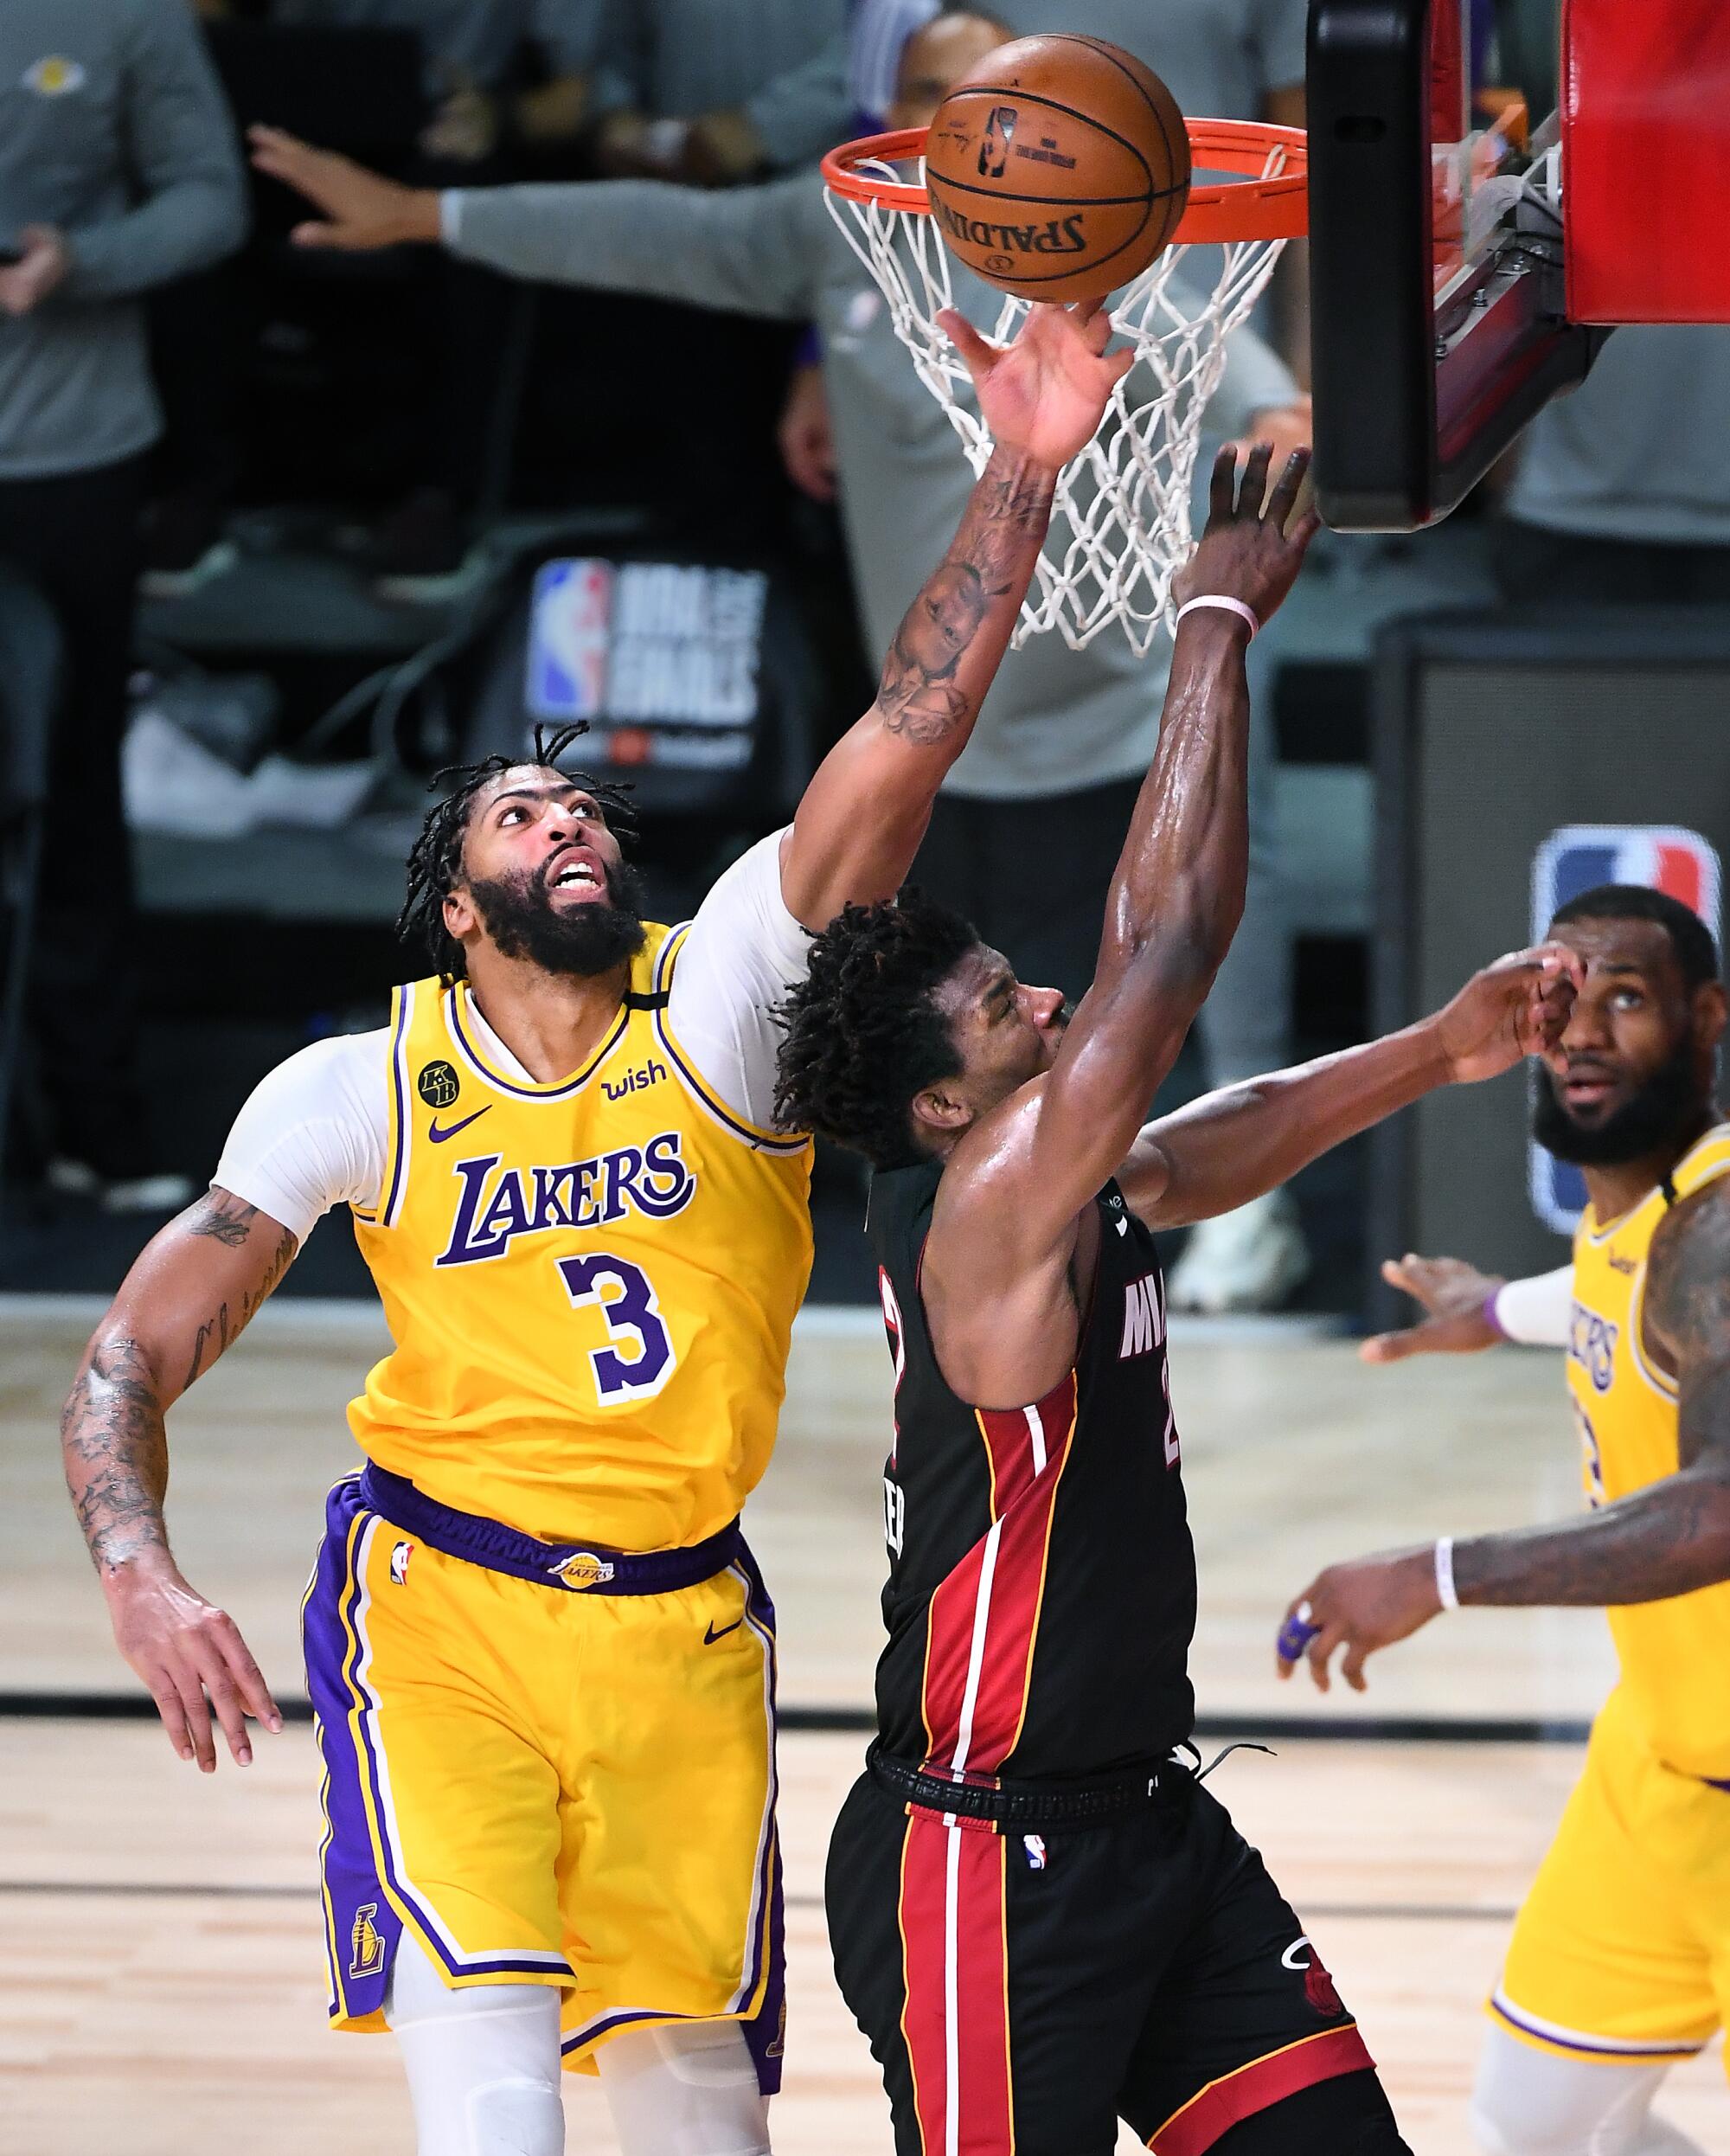 Lakers forward Anthony Davis blocks a layup by Heat forward Jimmy Butler late in Game 4.